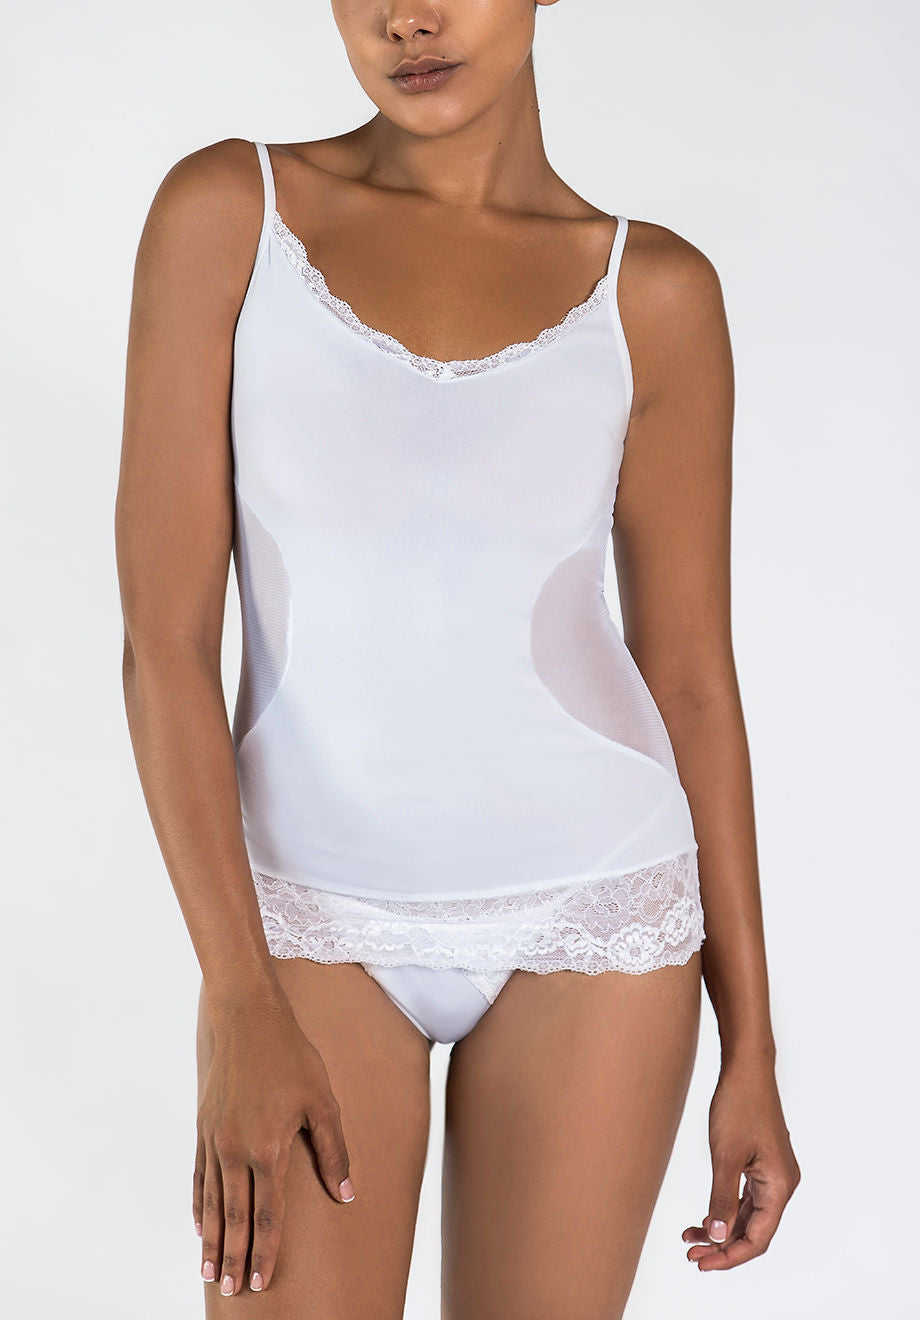 Tickle Me Fancy Camisole | White